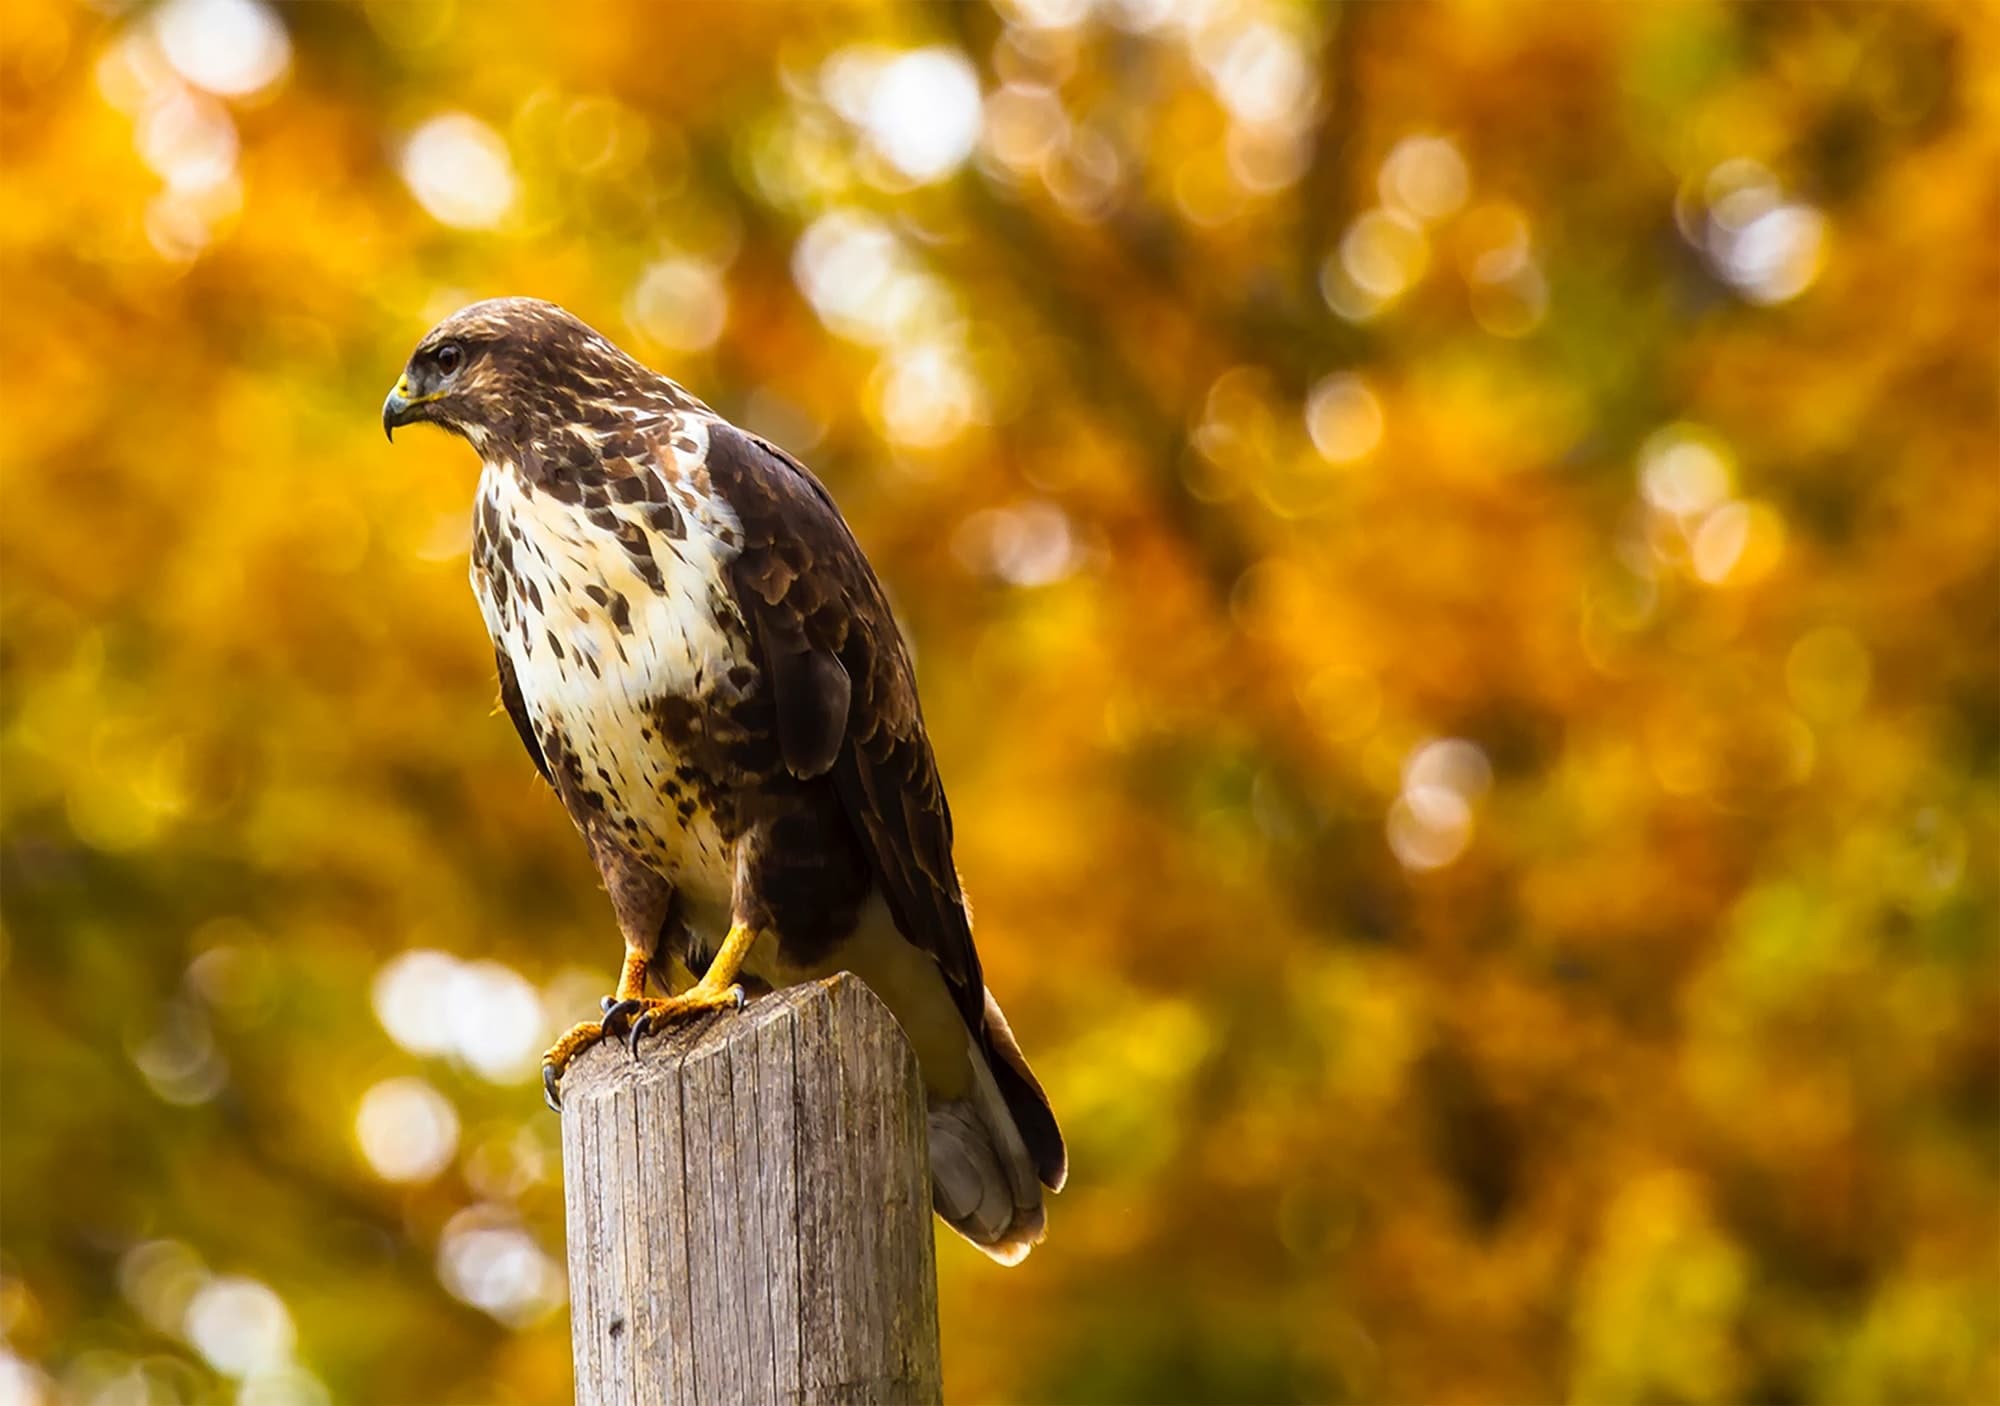 A hawk sat on a wooden perch. There is a tree in the background